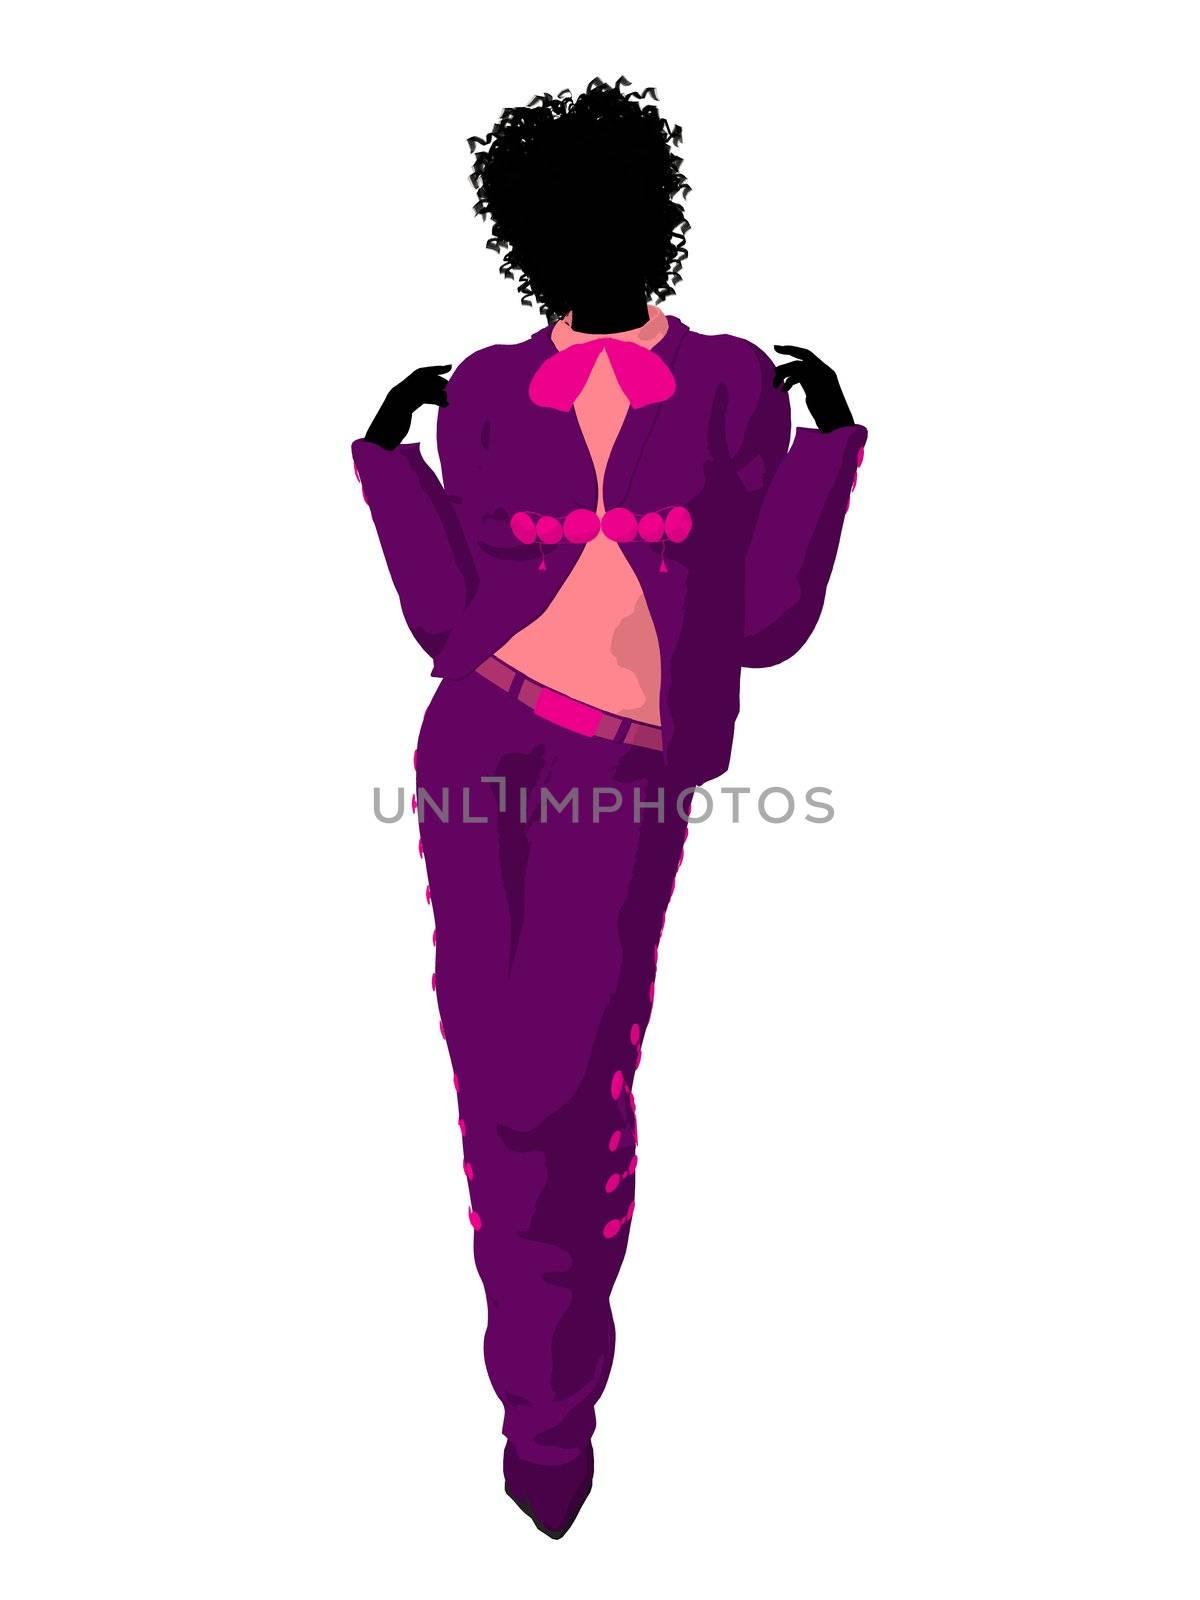 African American Female Mariachi Silhouette Illustration by kathygold